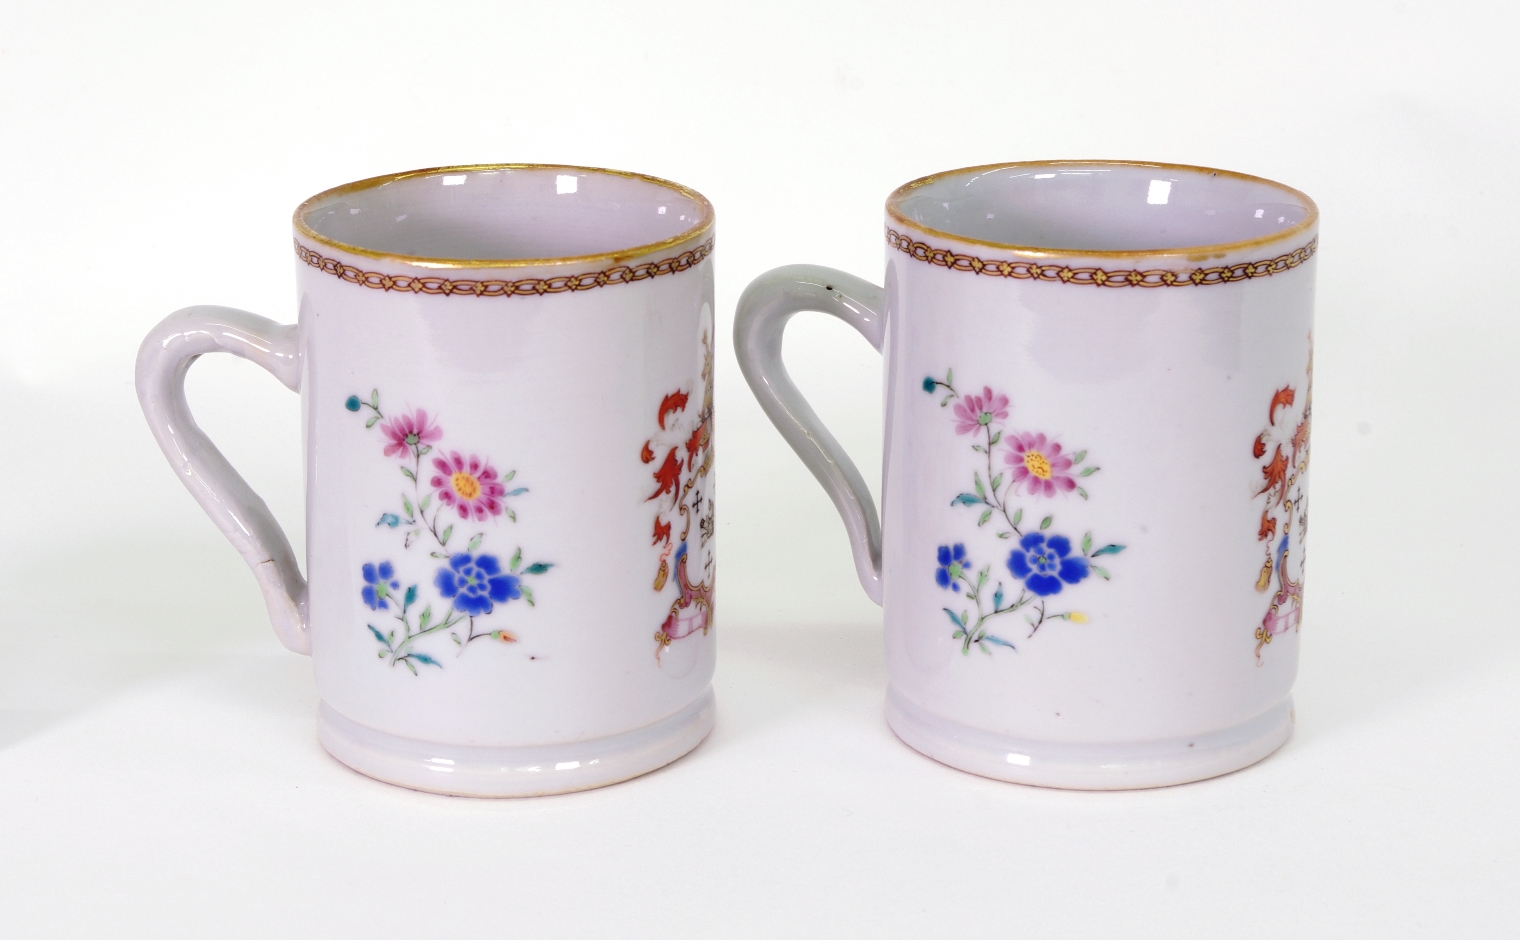 Pair of Chinese Export Armorial Small Mugs, c. 1750